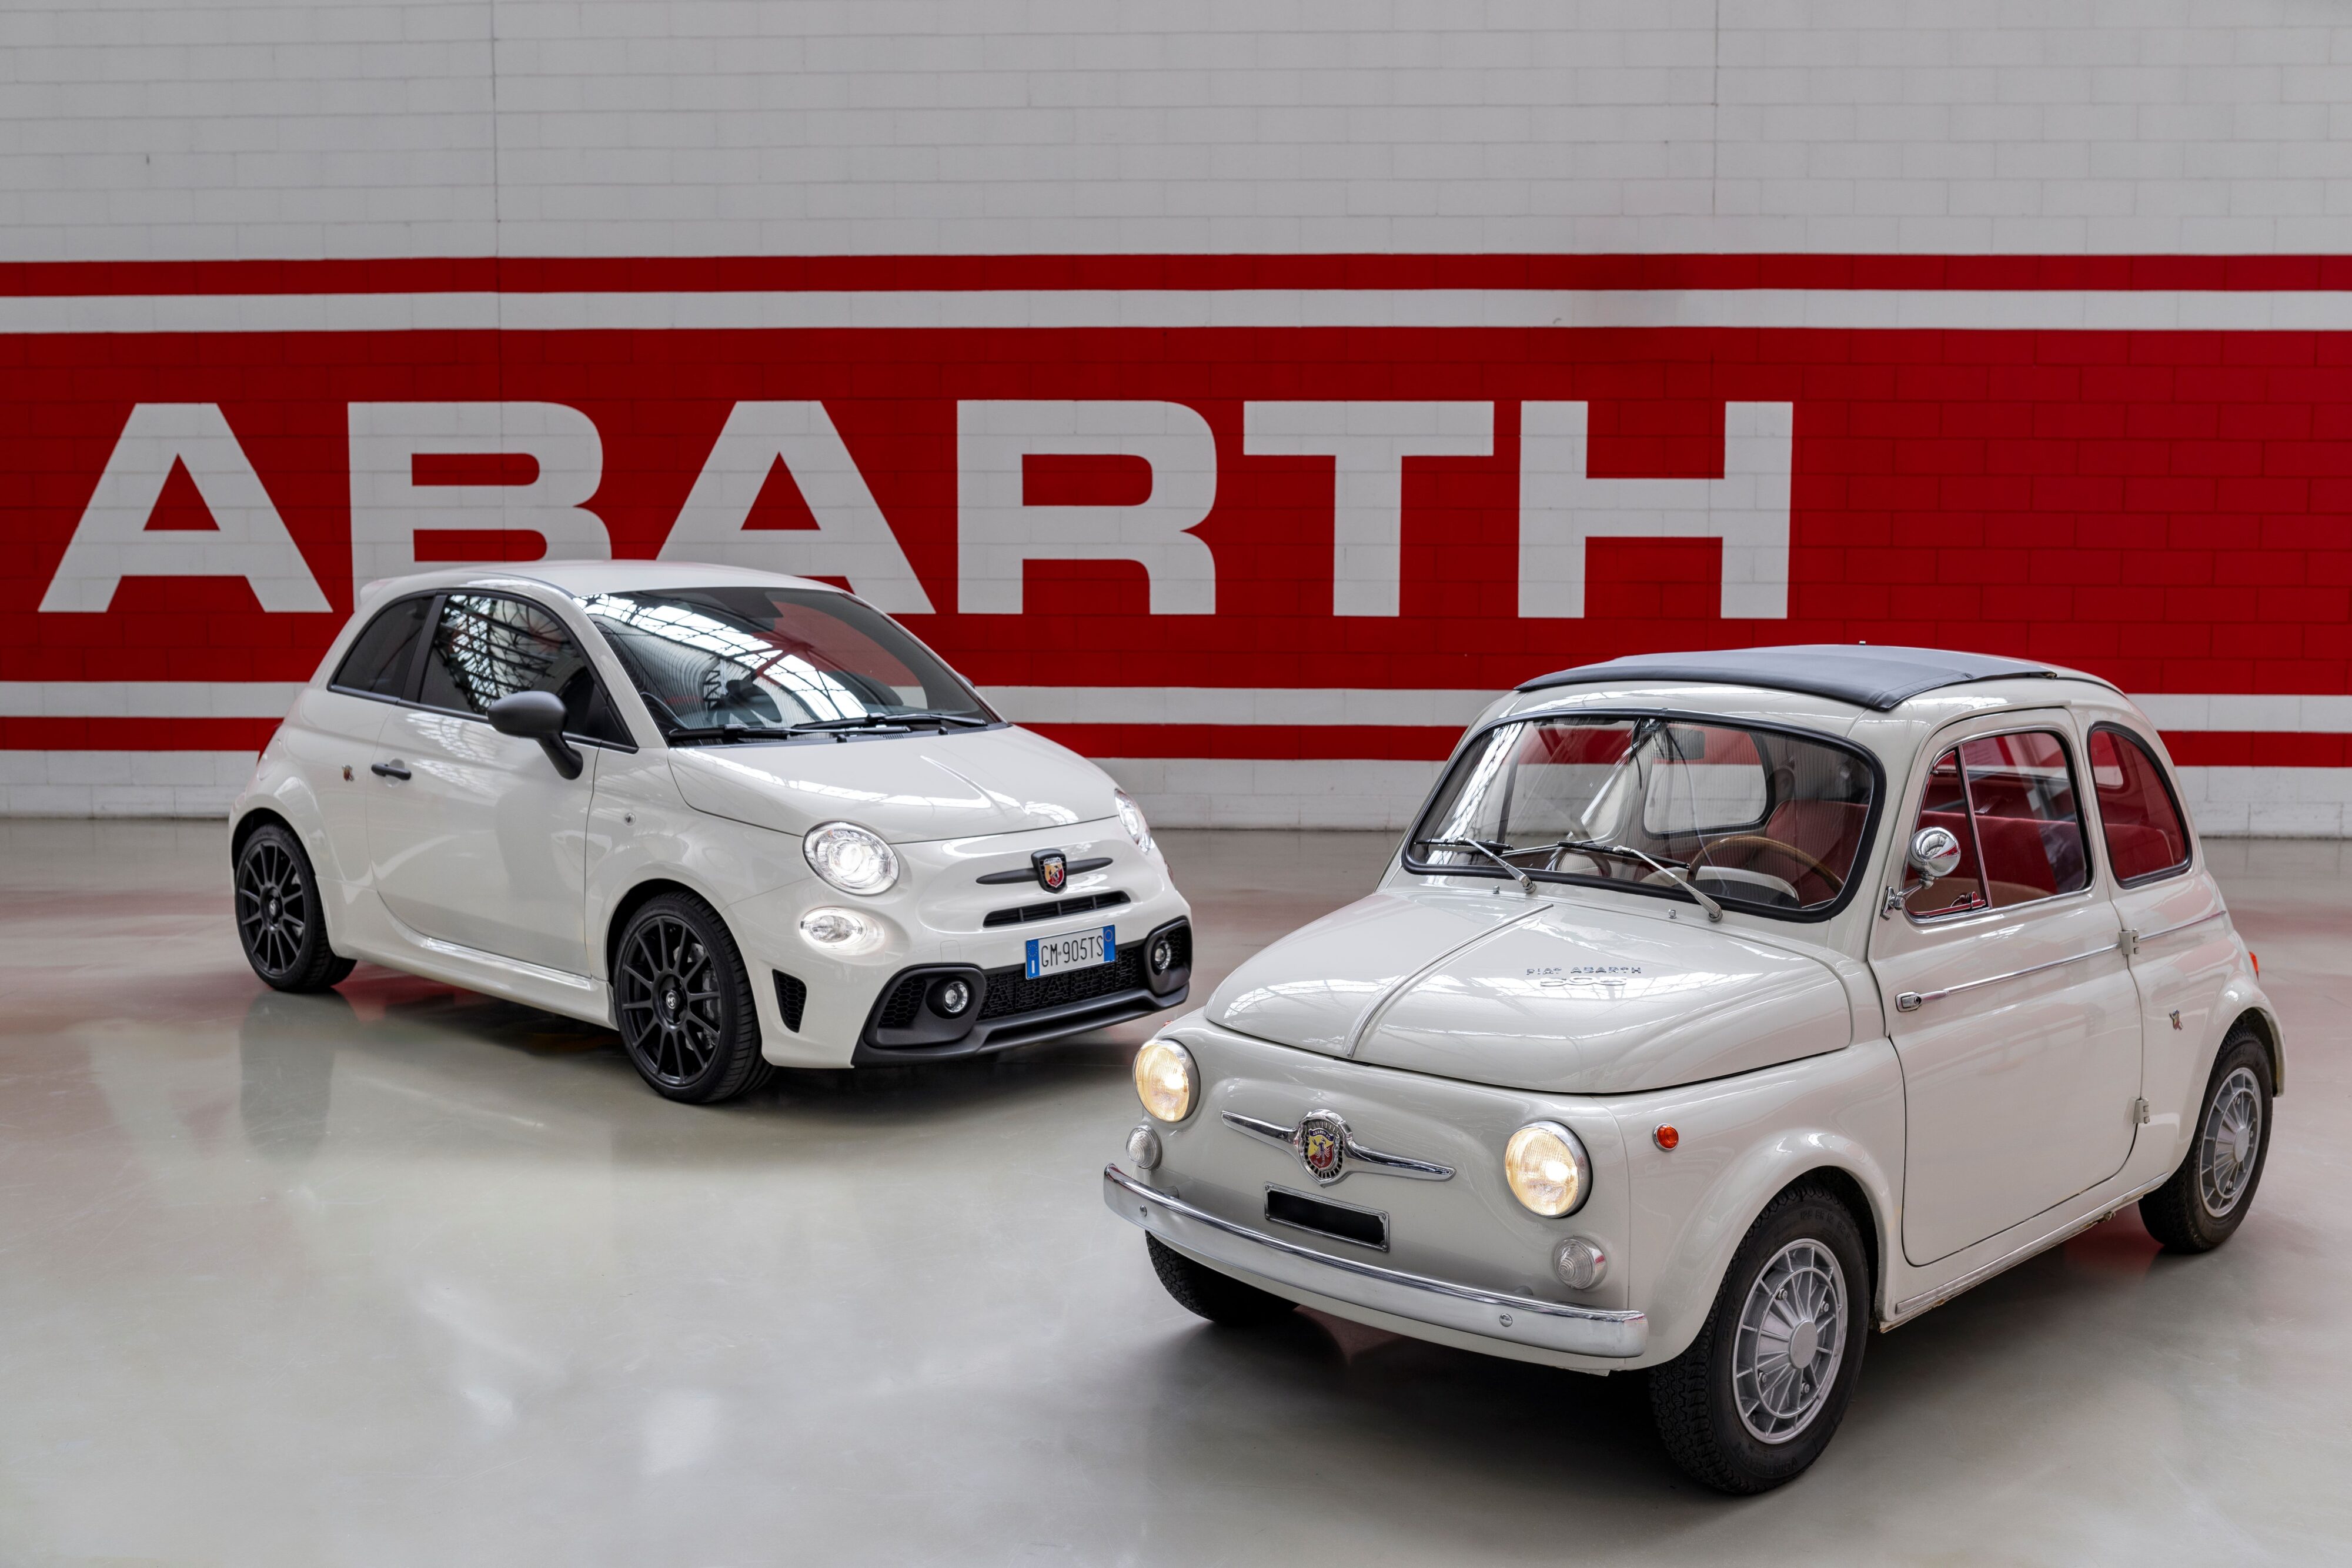 A photo of two Abarth 595s together, one old and one new. Both in white.